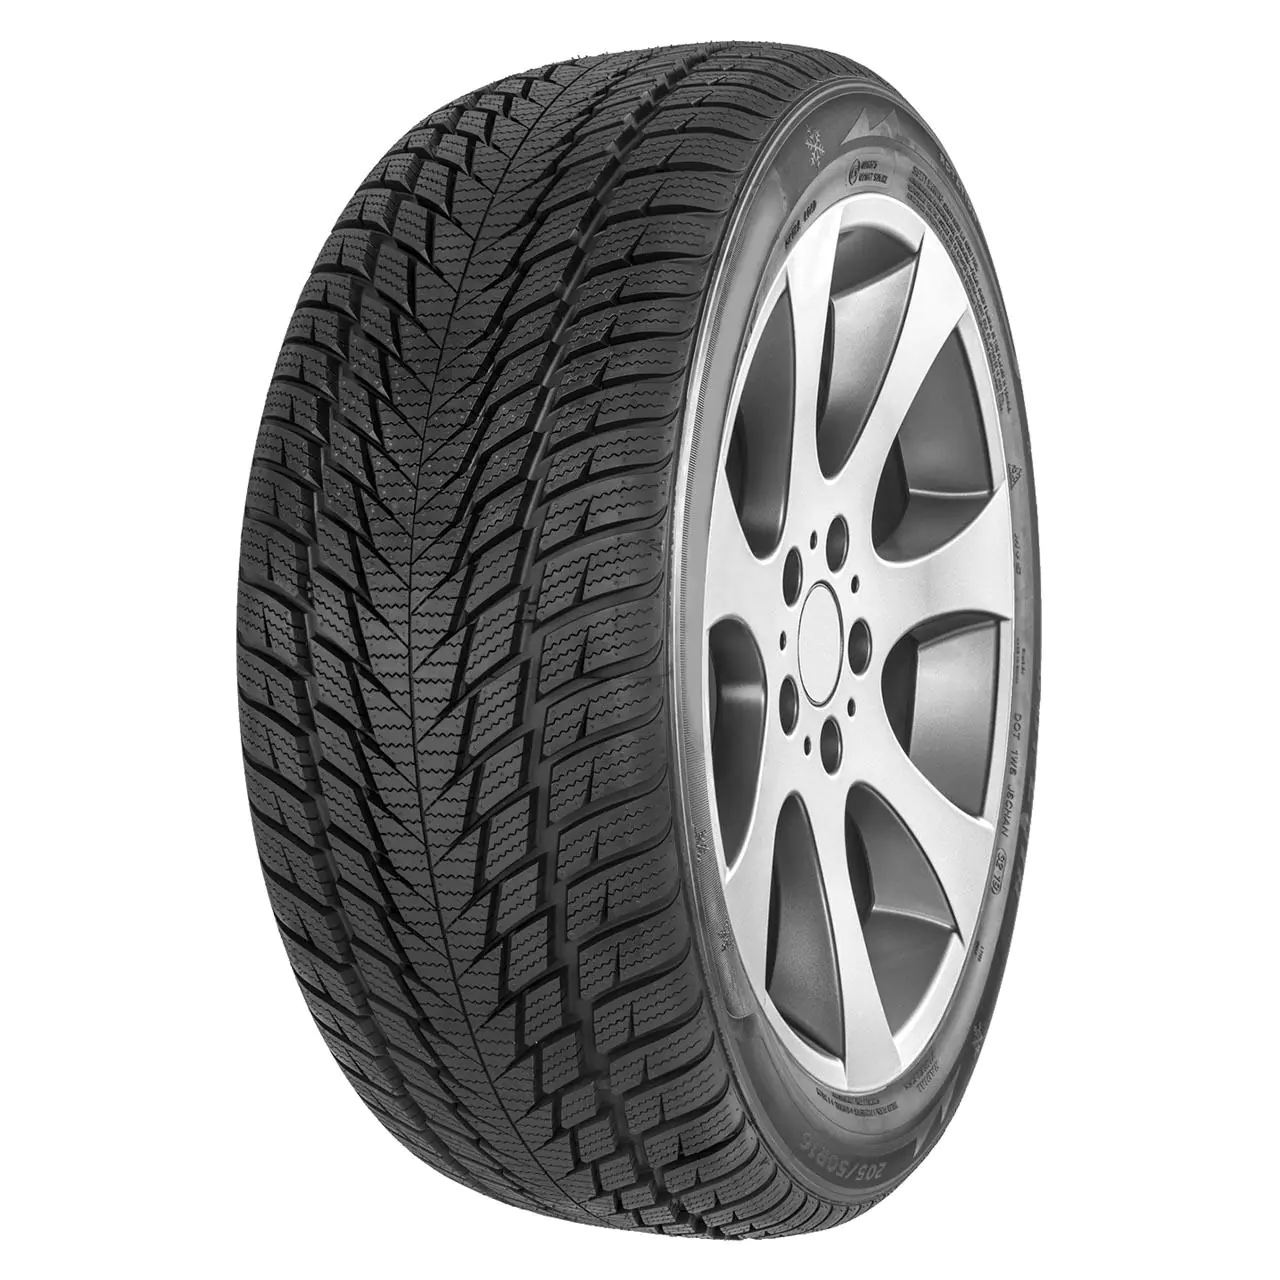 Gomme Autovettura Fortuna 245/45 R20 103V GOWIN UHP3 XL M+S Invernale